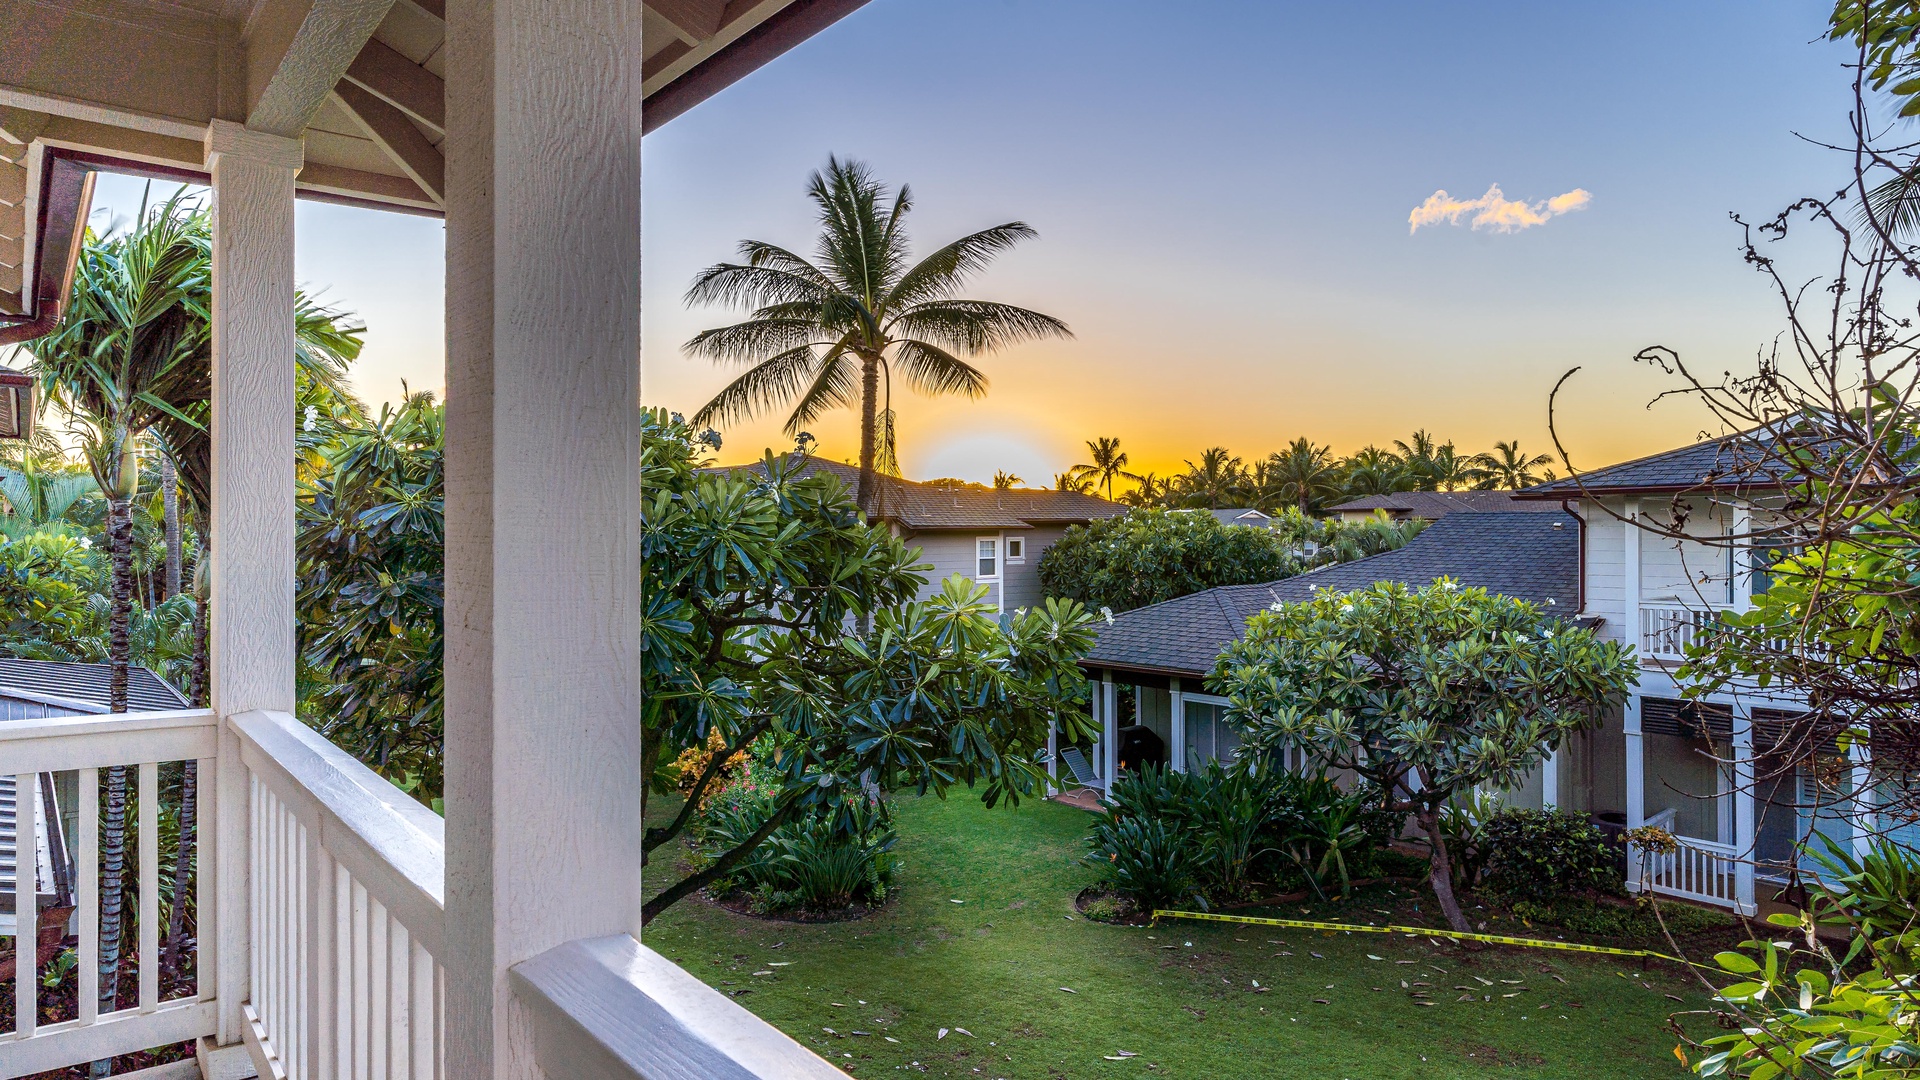 Kapolei Vacation Rentals, Coconut Plantation 1174-2 - A lovely sunset from the upstairs lanai.